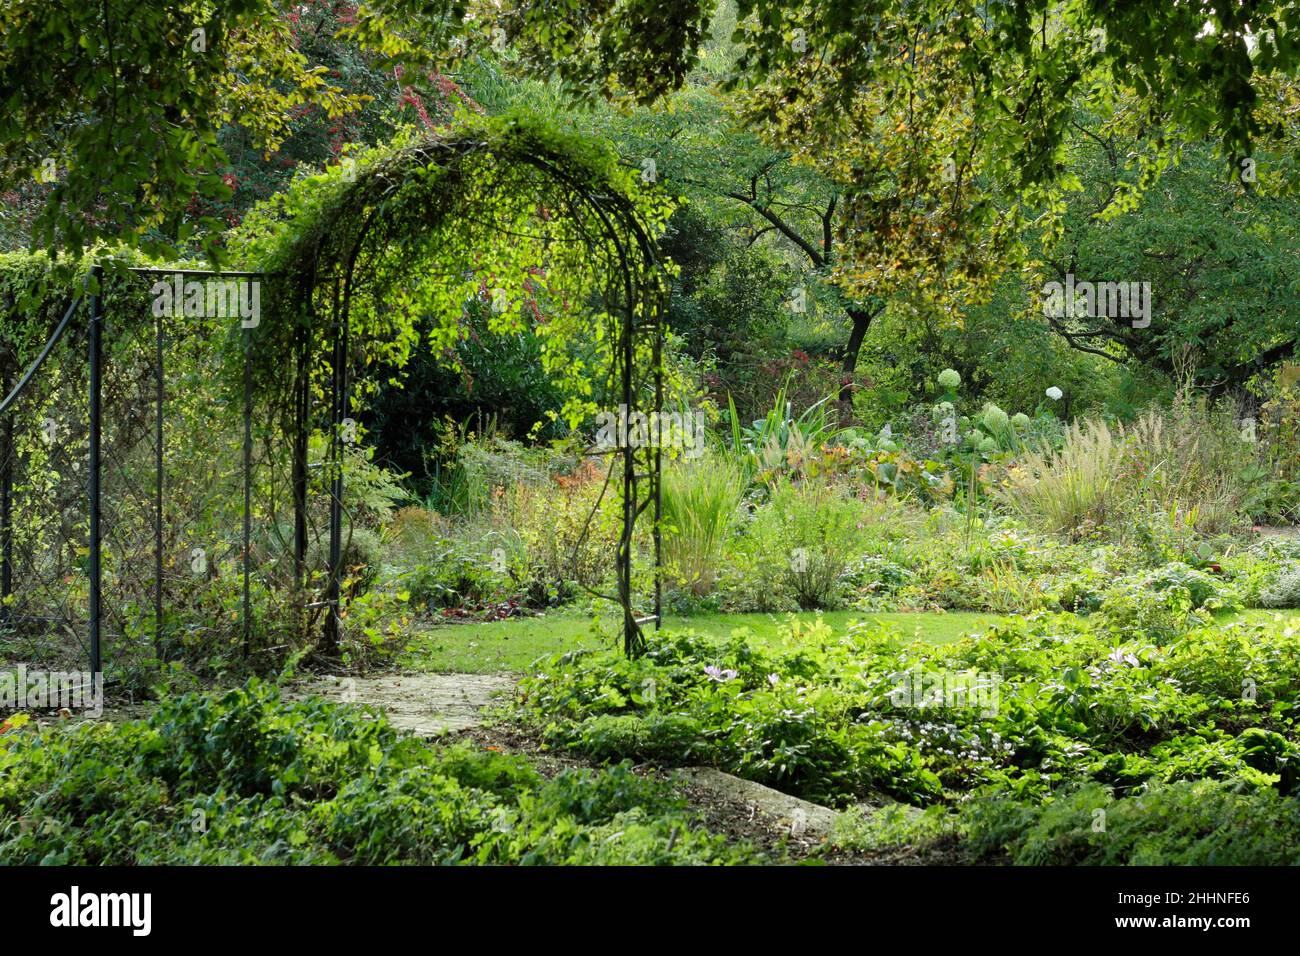 Garden arch.Garden arch adds visual interest and serves to divide zones between a woodland garden and perennial beds. Autumn. UK Stock Photo